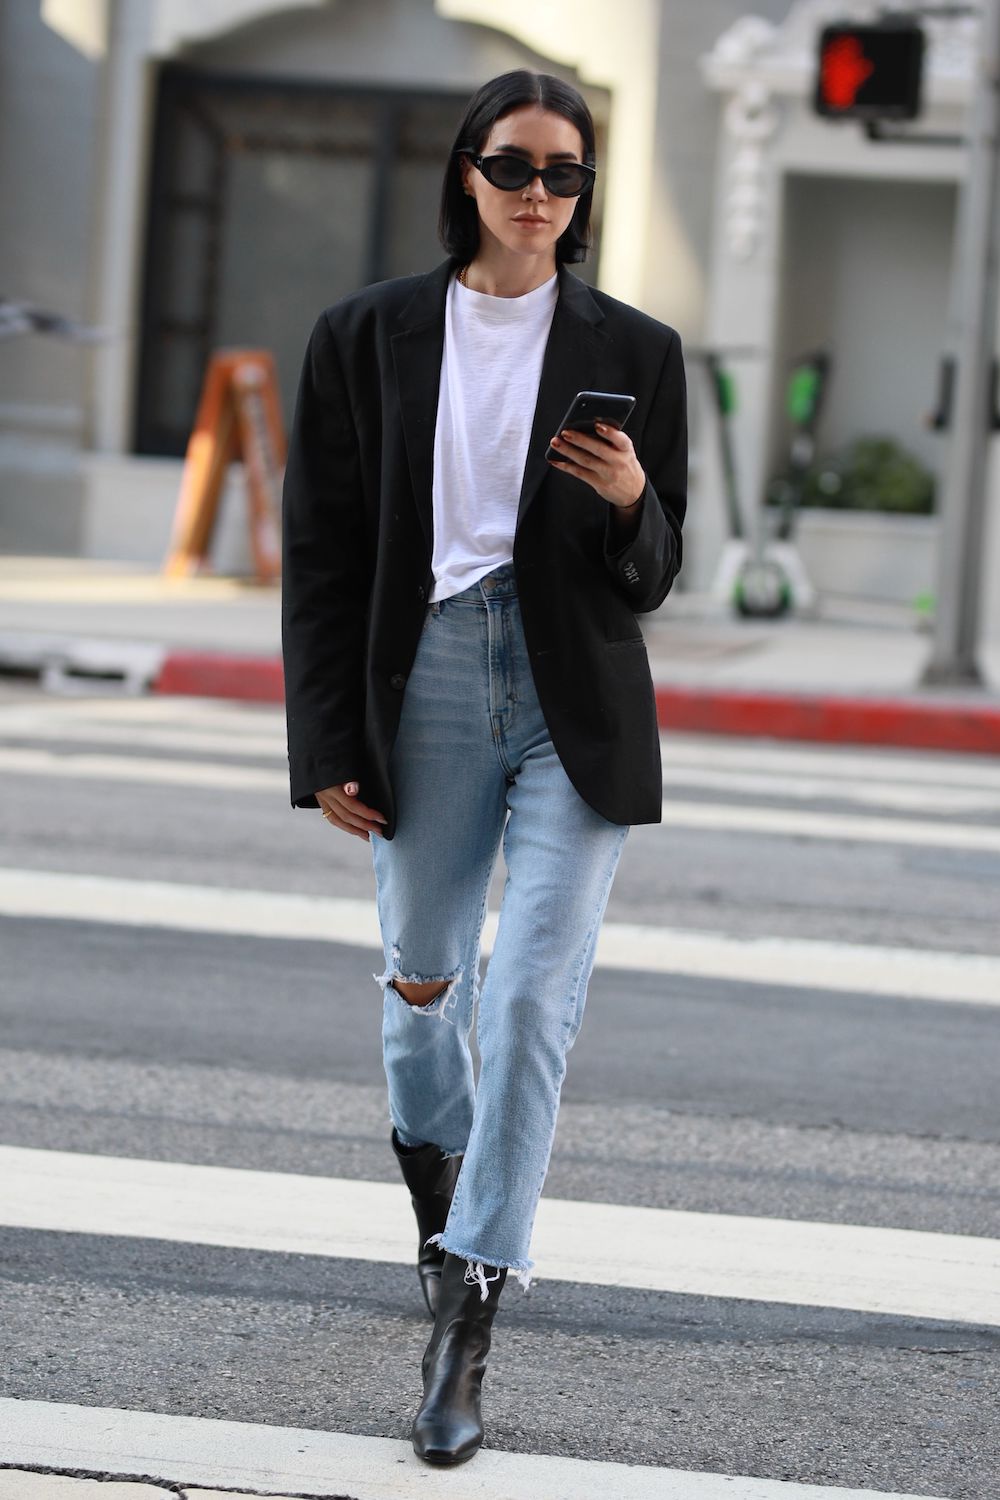 How to Bring Your White Tee and Jeans Look to the Next-Level